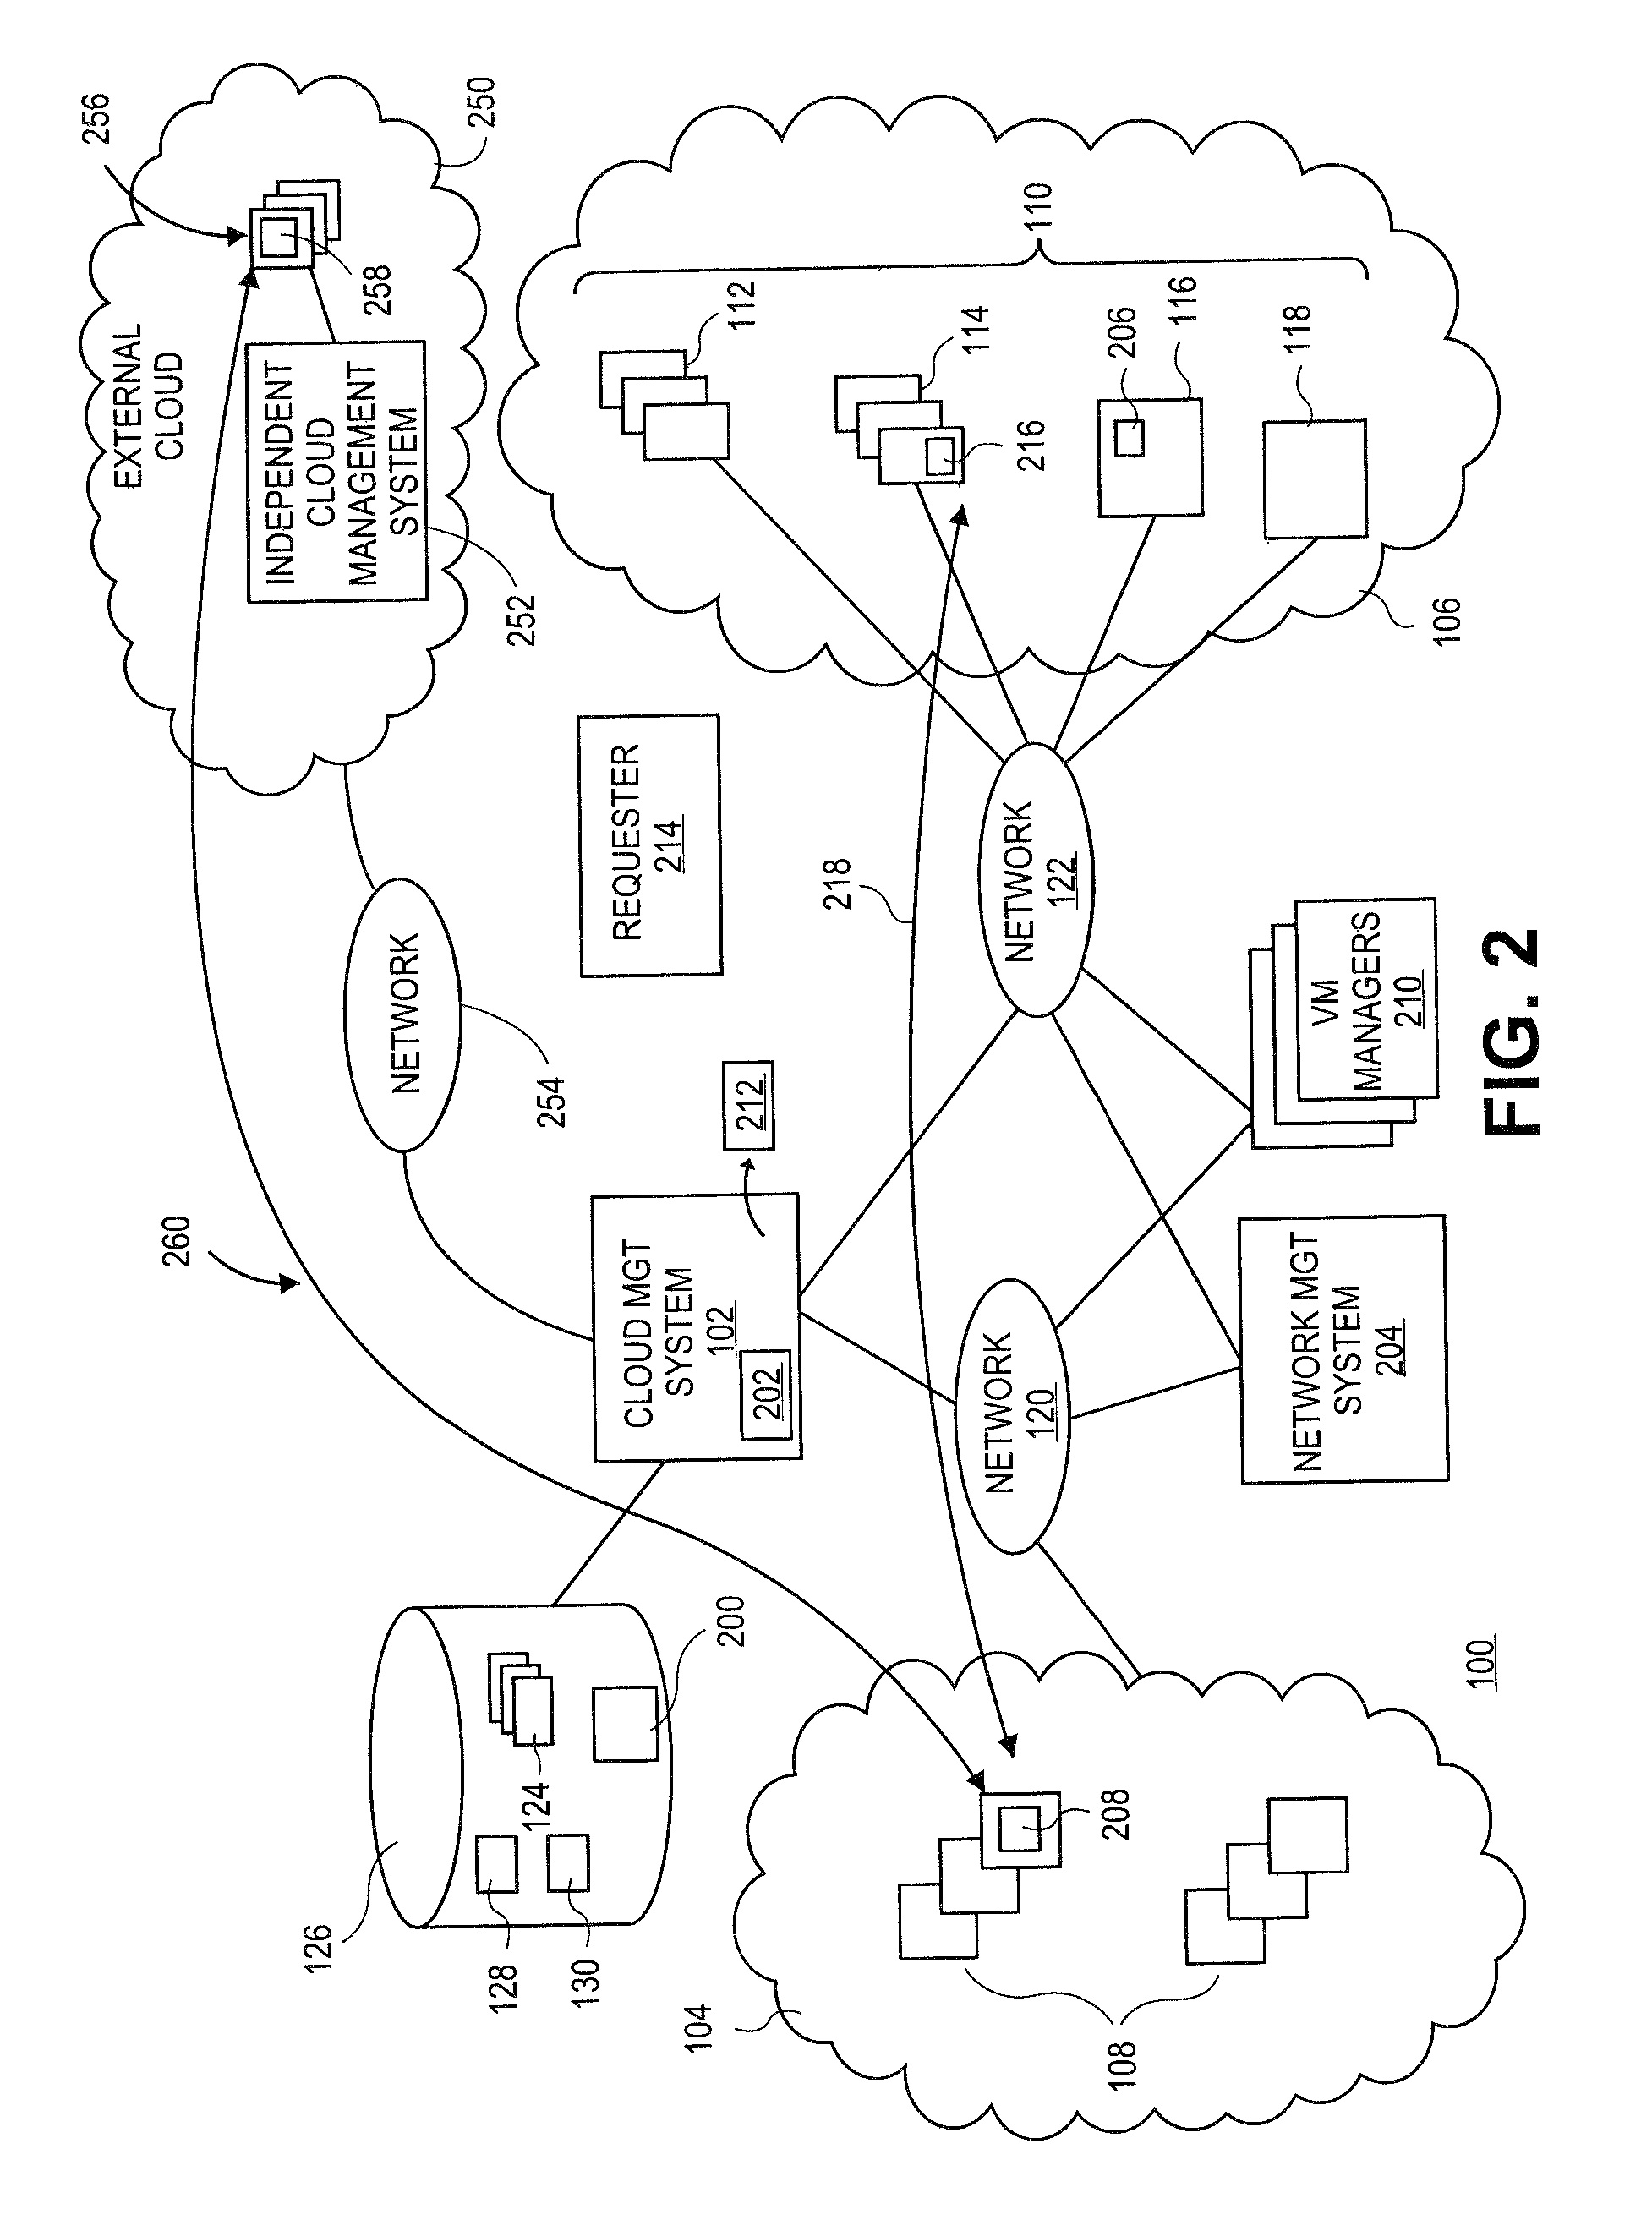 Methods and systems for cloud management using multiple cloud management schemes to allow communication between independently controlled clouds